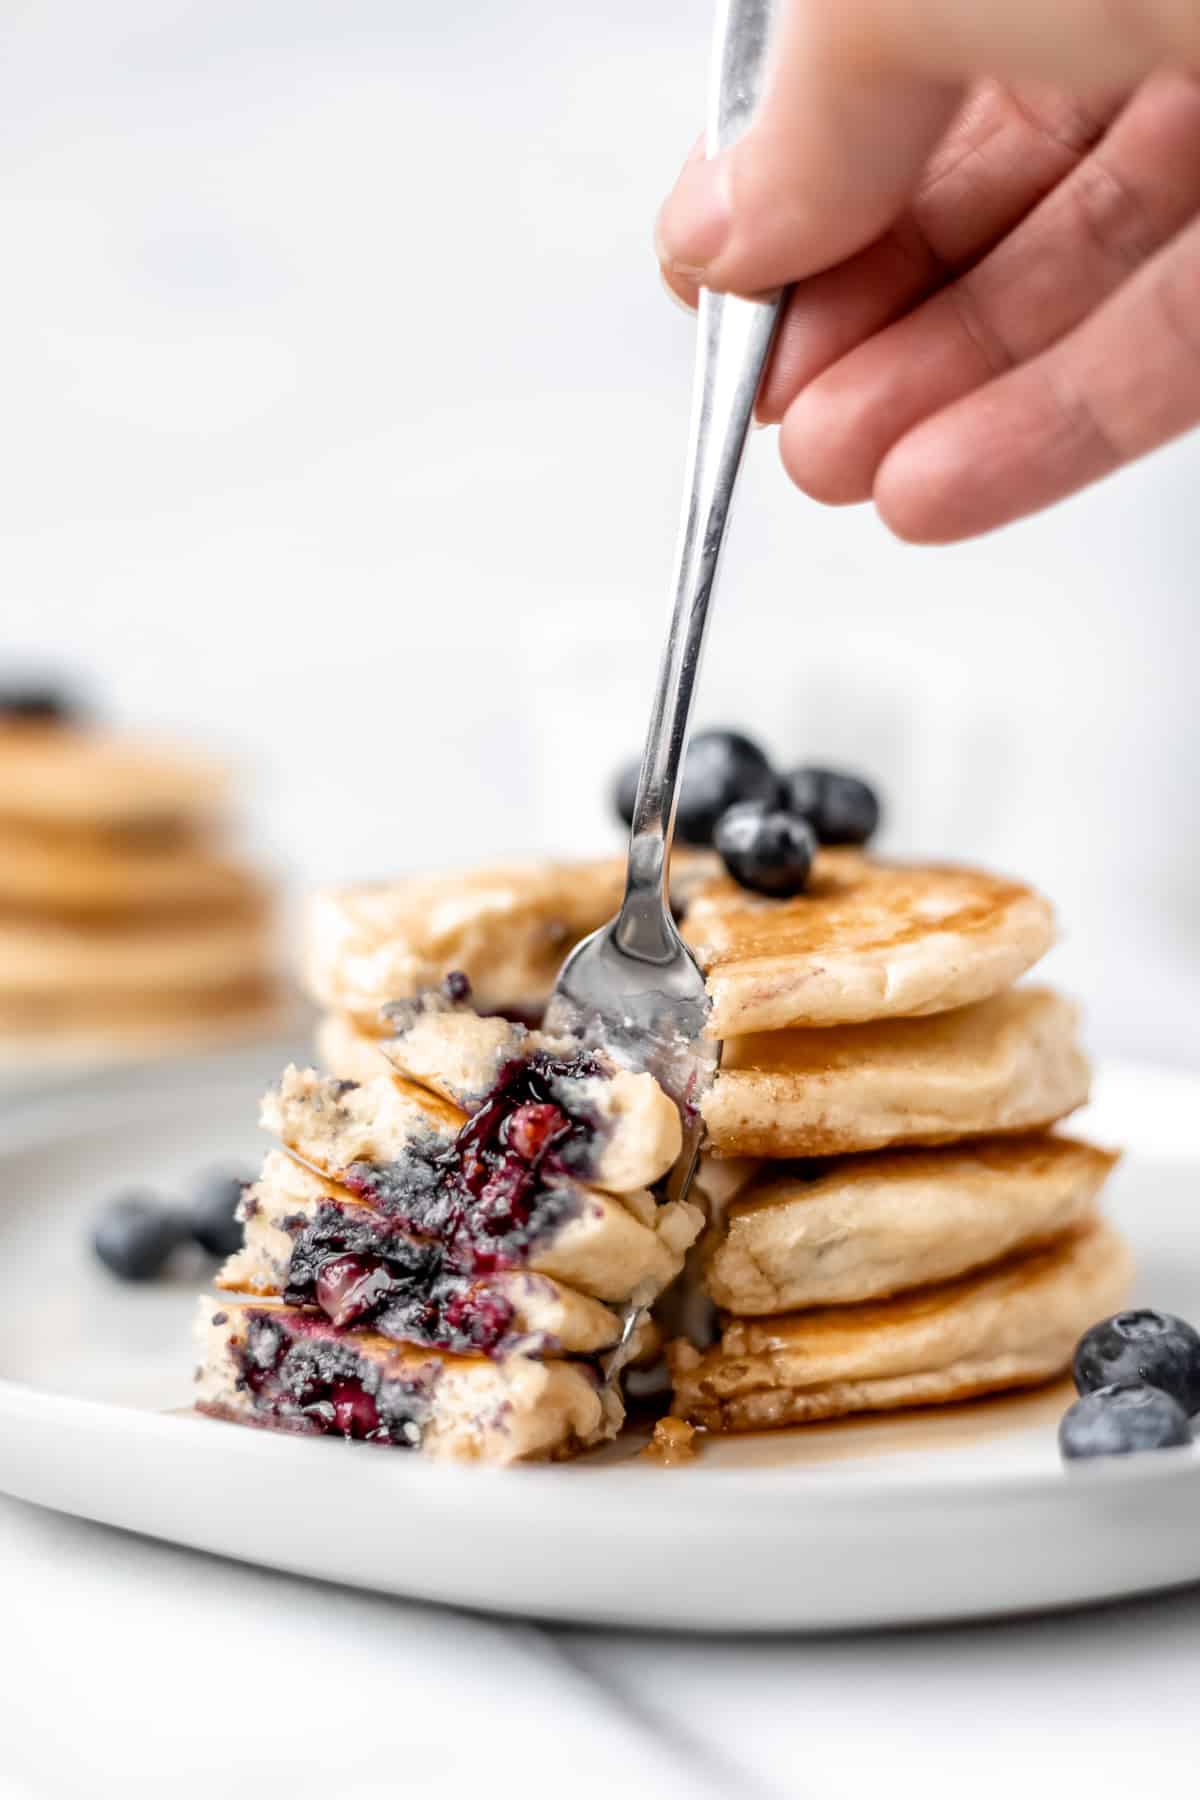 A fork with a bite of 4 stacked blueberry pancakes on it with two plates of blueberry pancakes in the background.